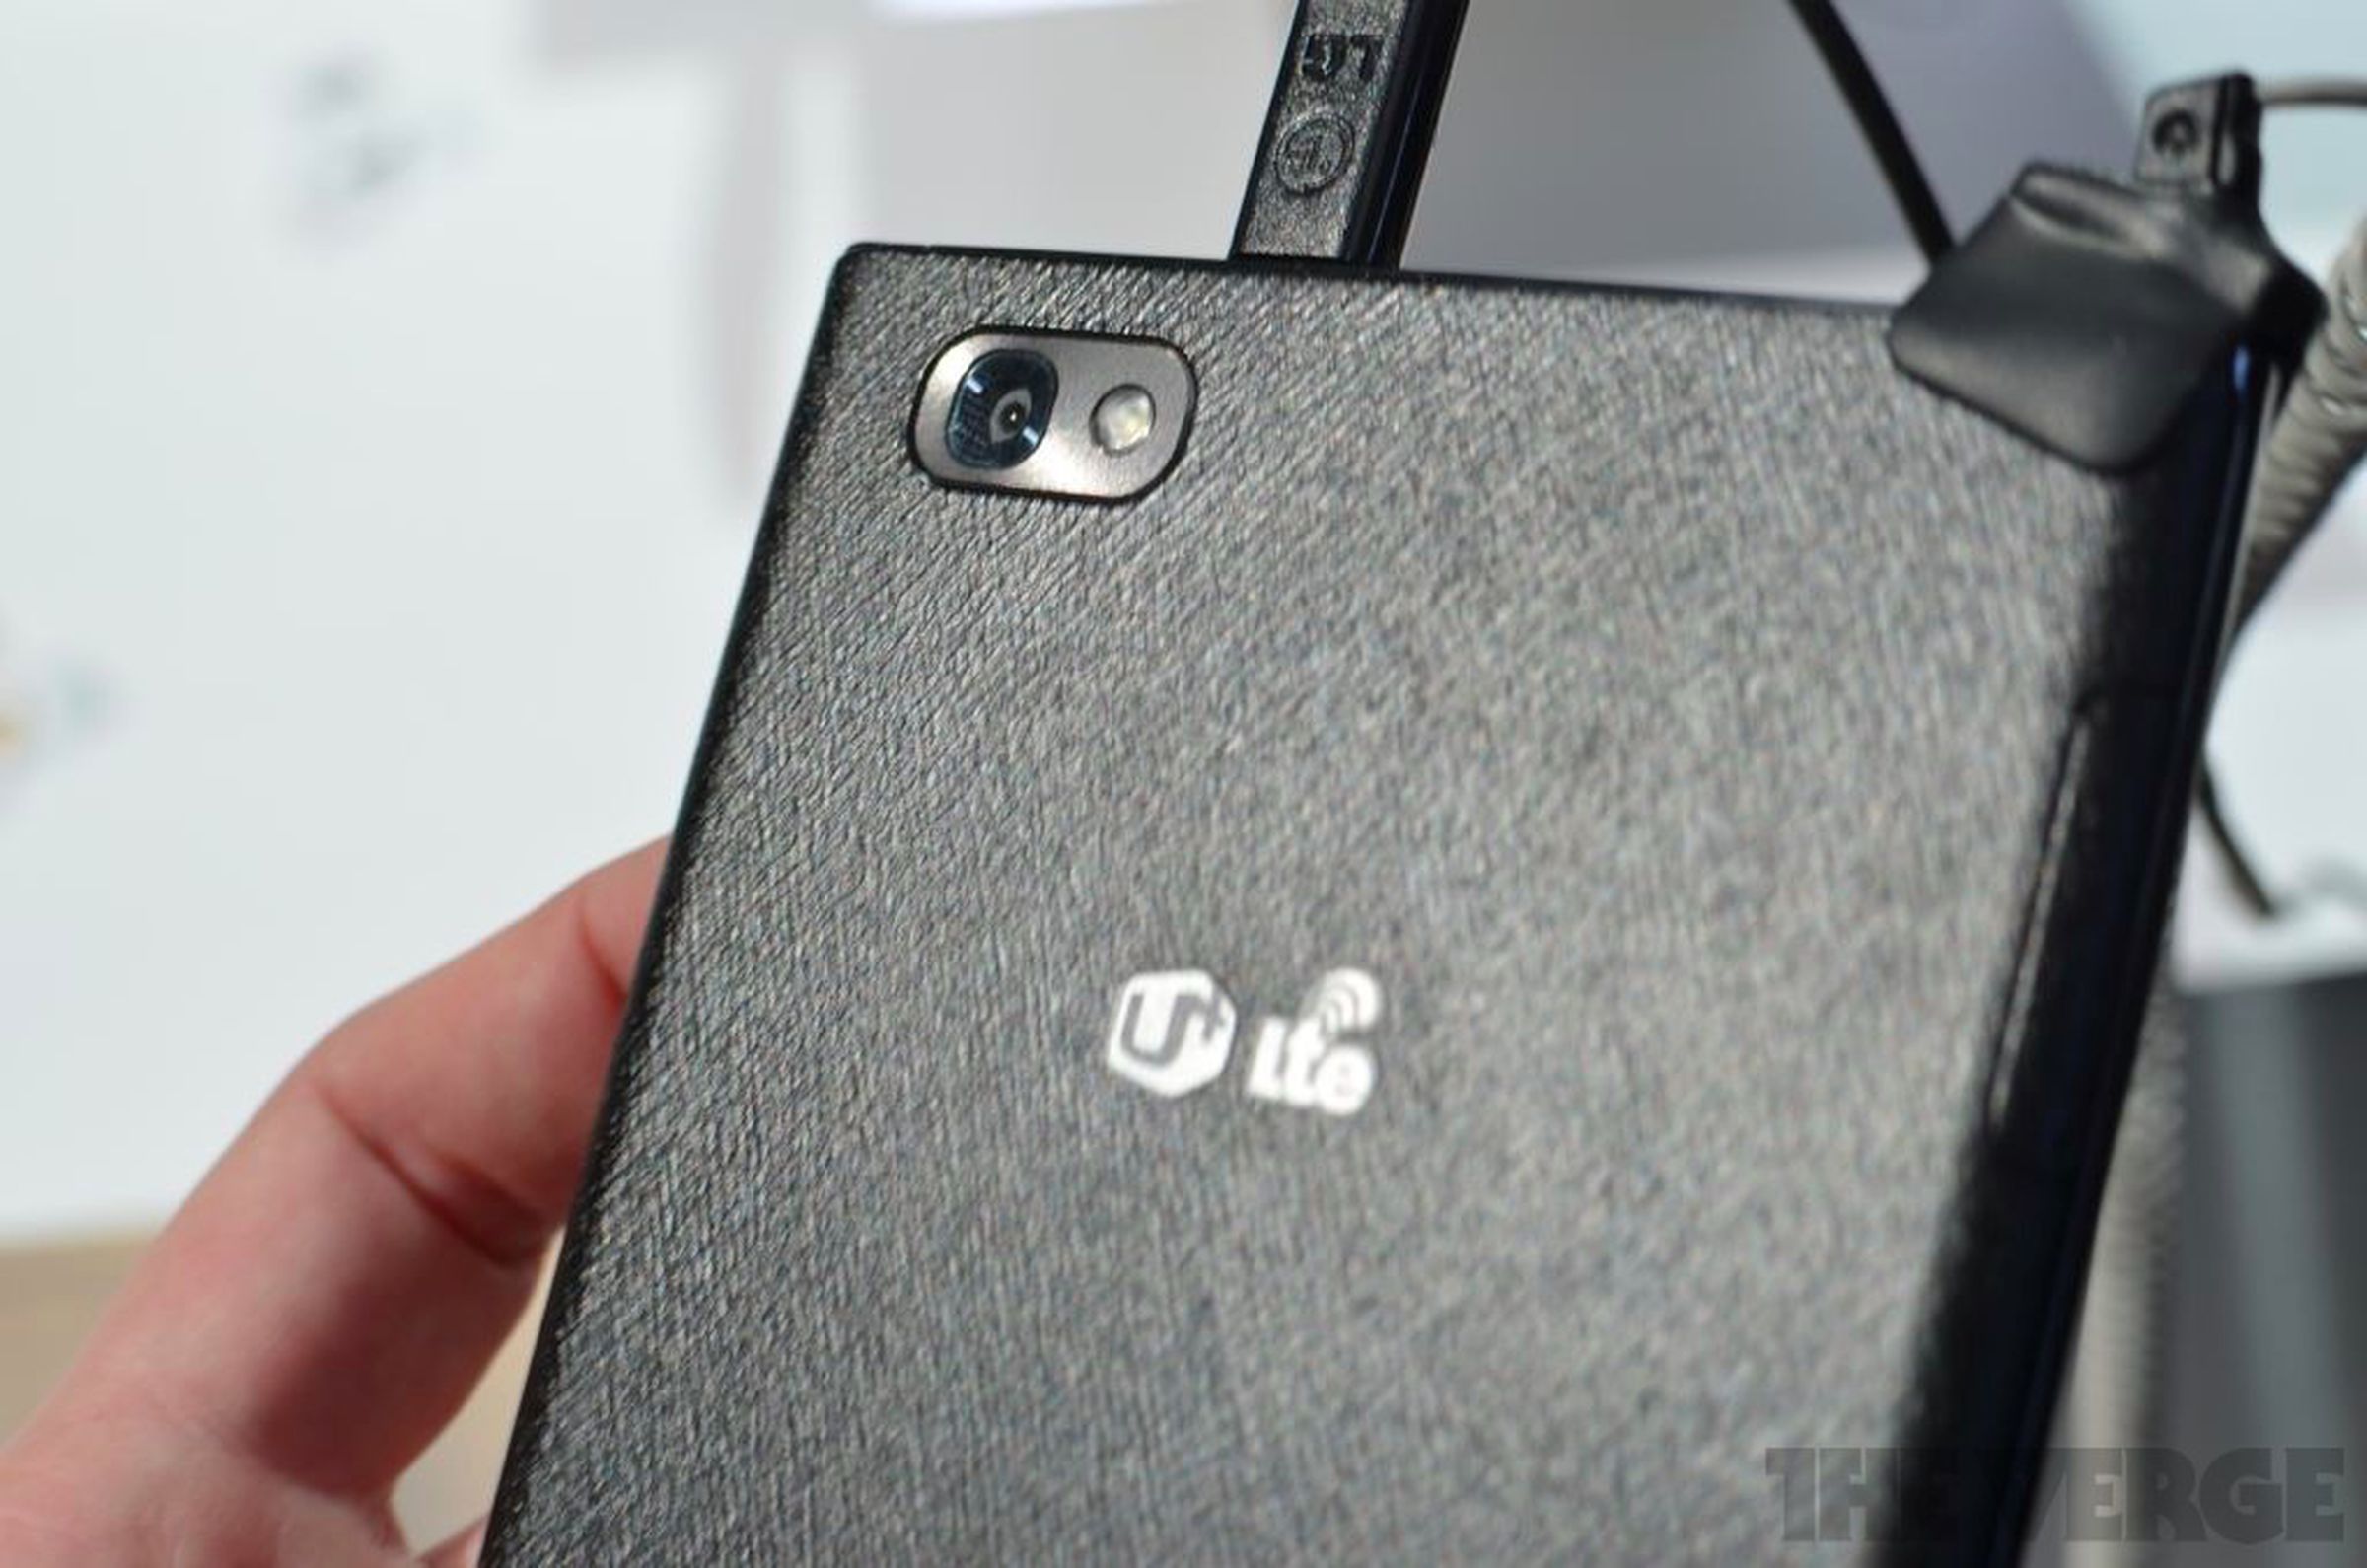 LG Optimus Vu hands-on pictures